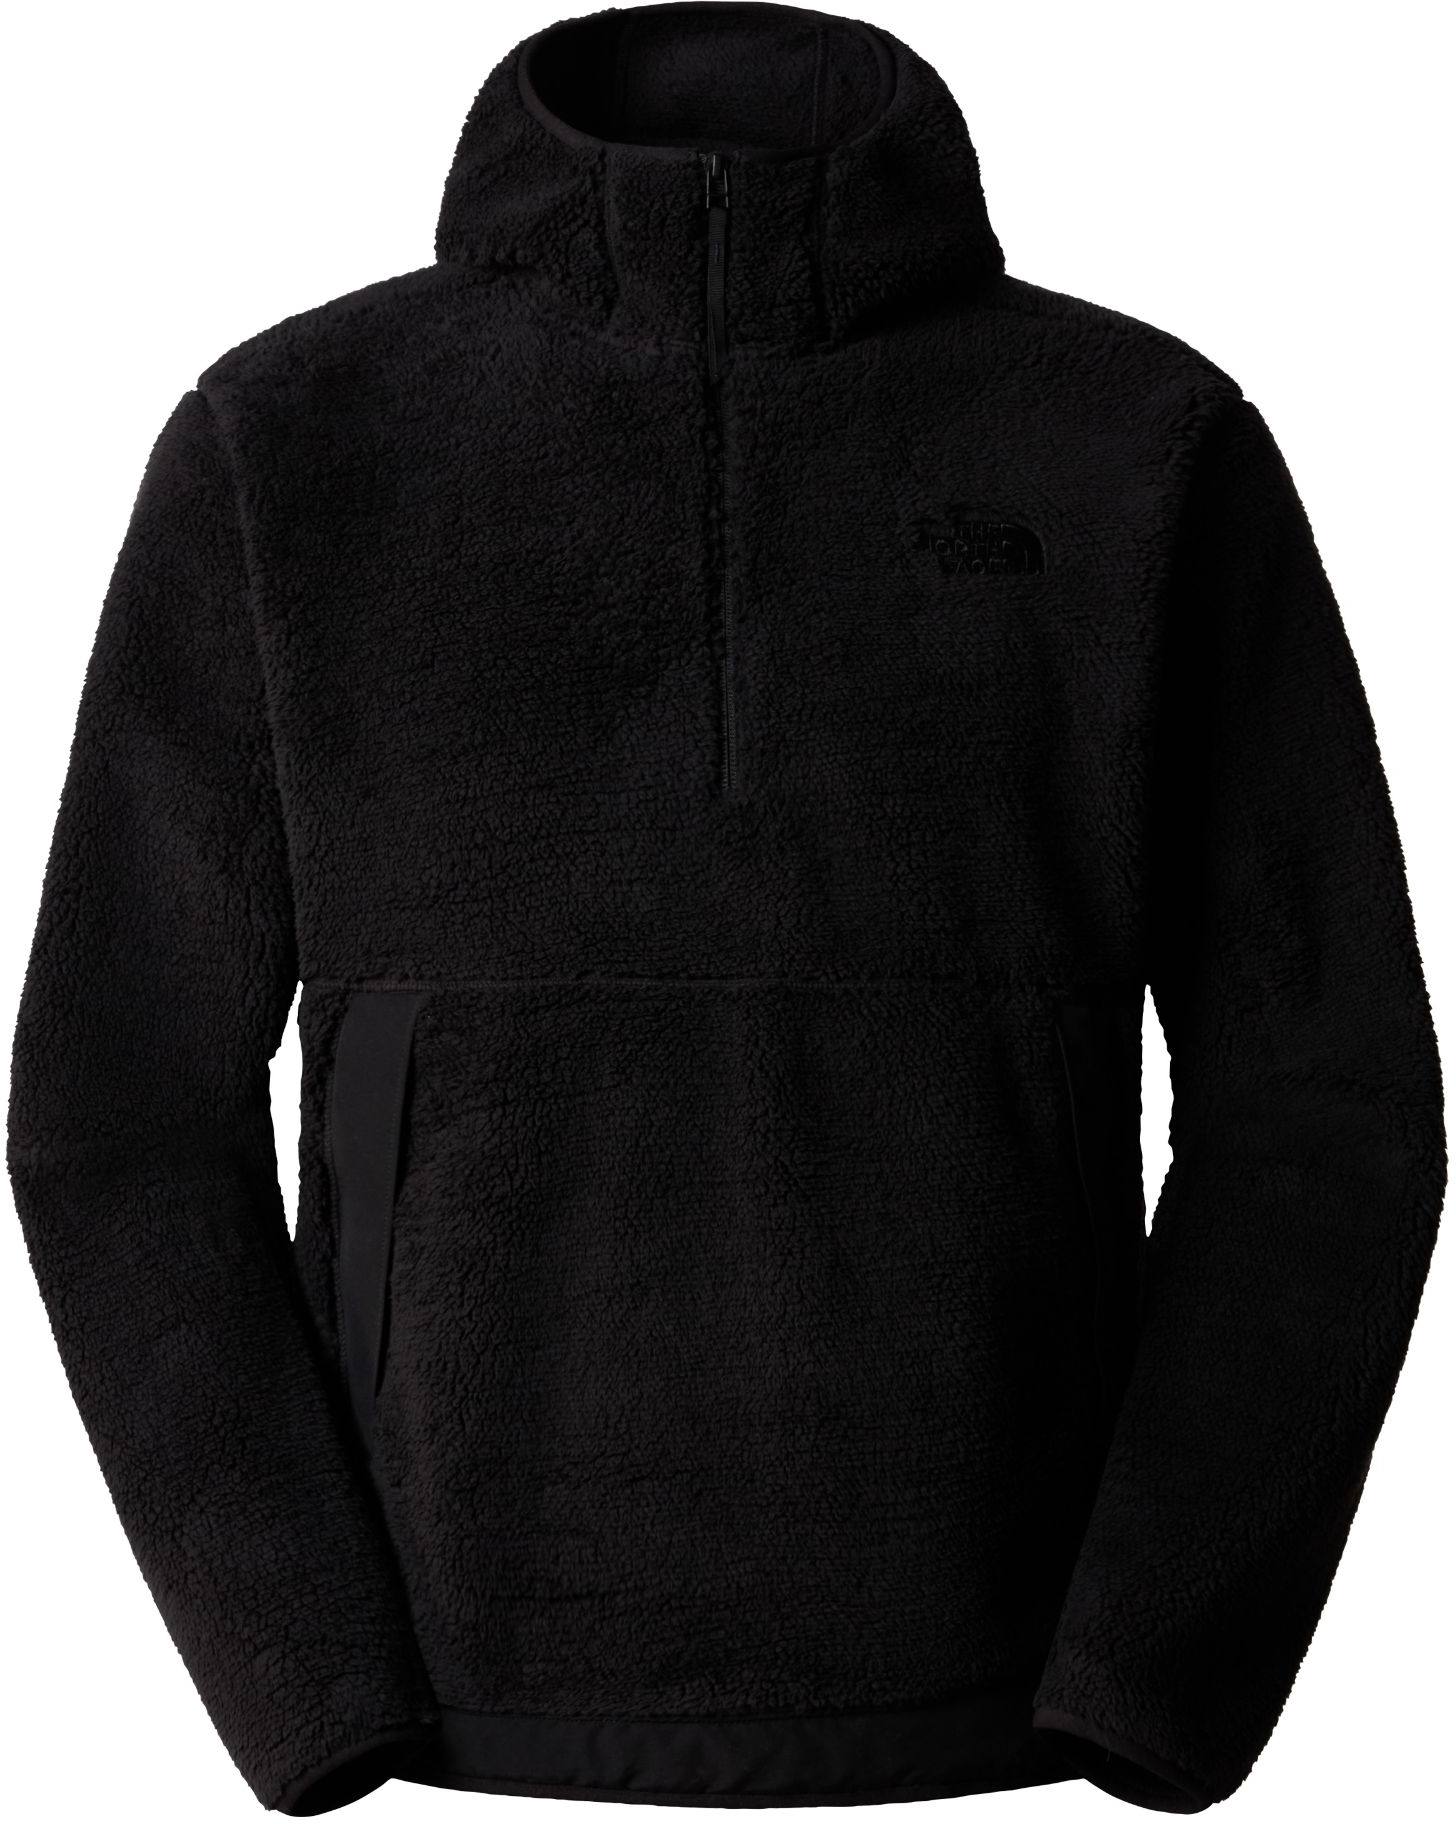 THE NORTH FACE Women's Campshire Fleece Hoodie